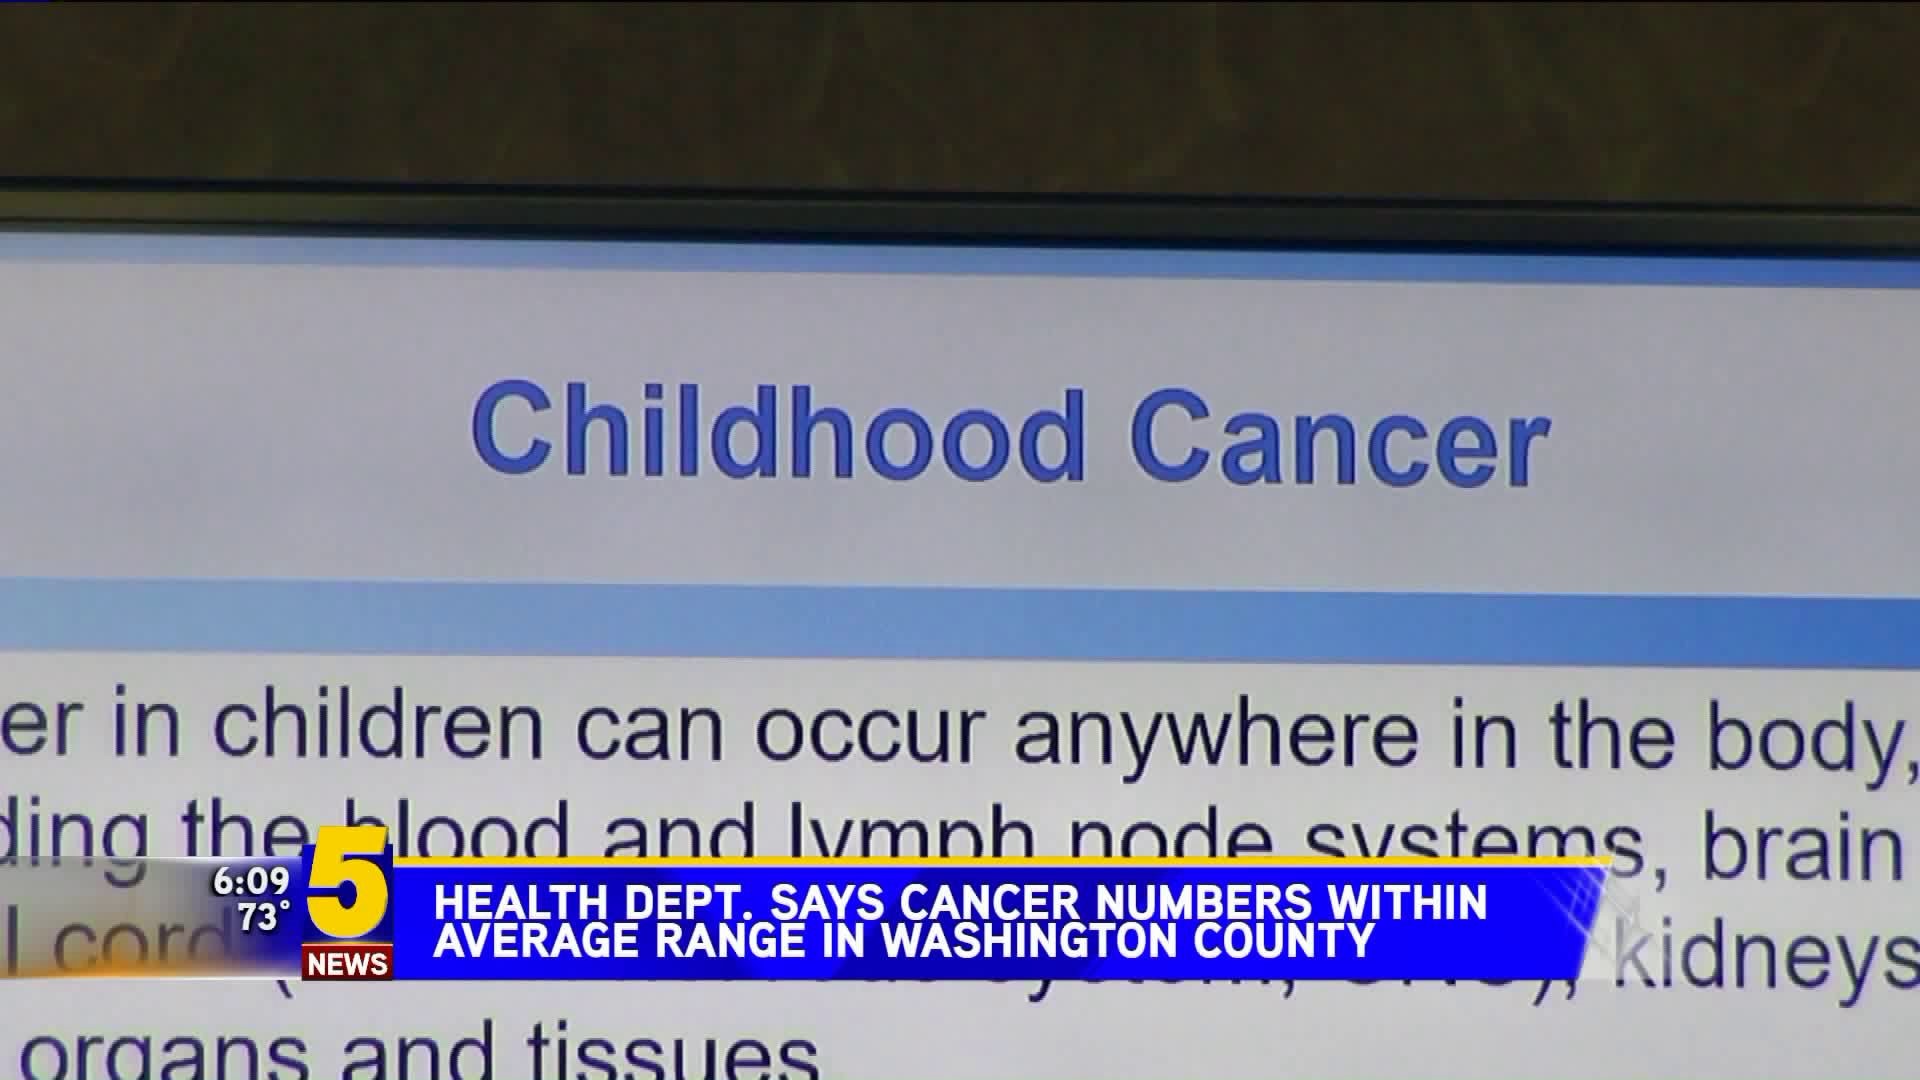 Health Department Says Cancer Numbers Within Average Range in Washington County